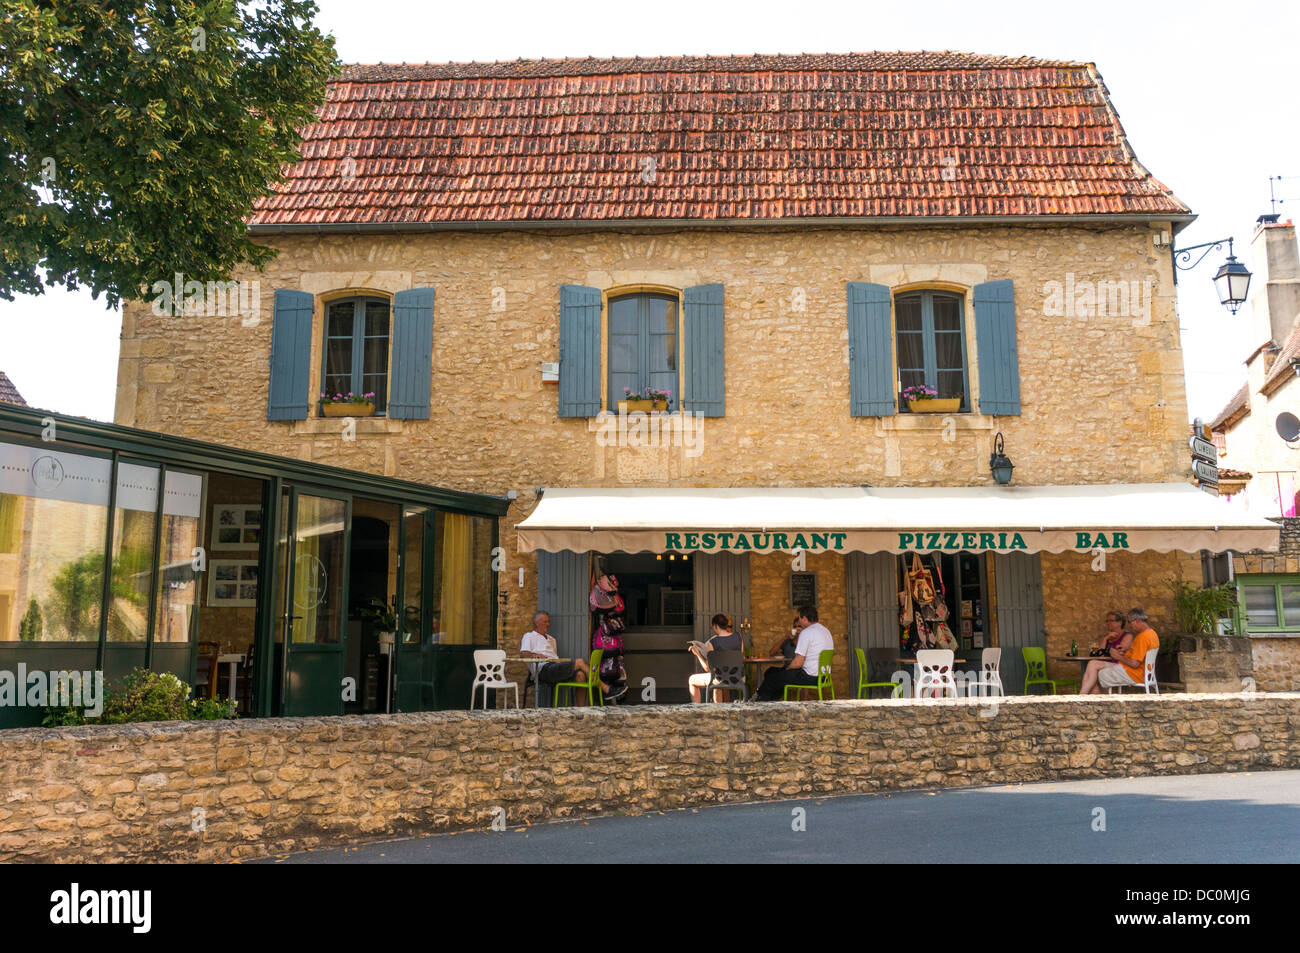 People sitting outside a Restaurant in the village of Trémolat, a commune in the Dordogne department in Aquitaine in south west France, Europe. Stock Photo